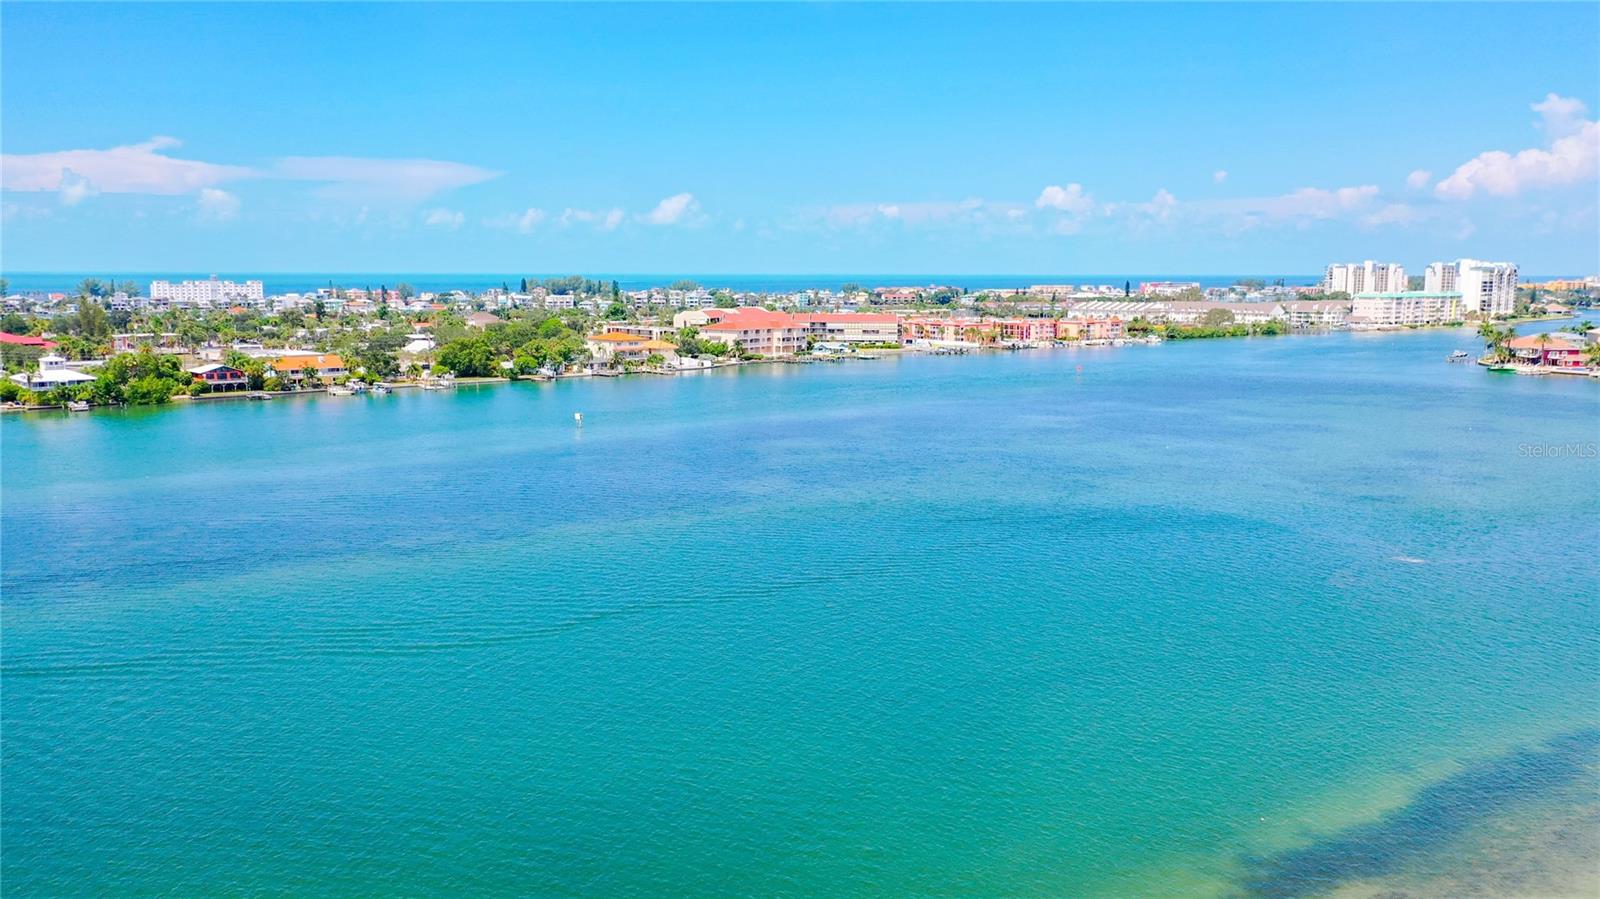 This is an aerial looking down the Intracoastal waterway